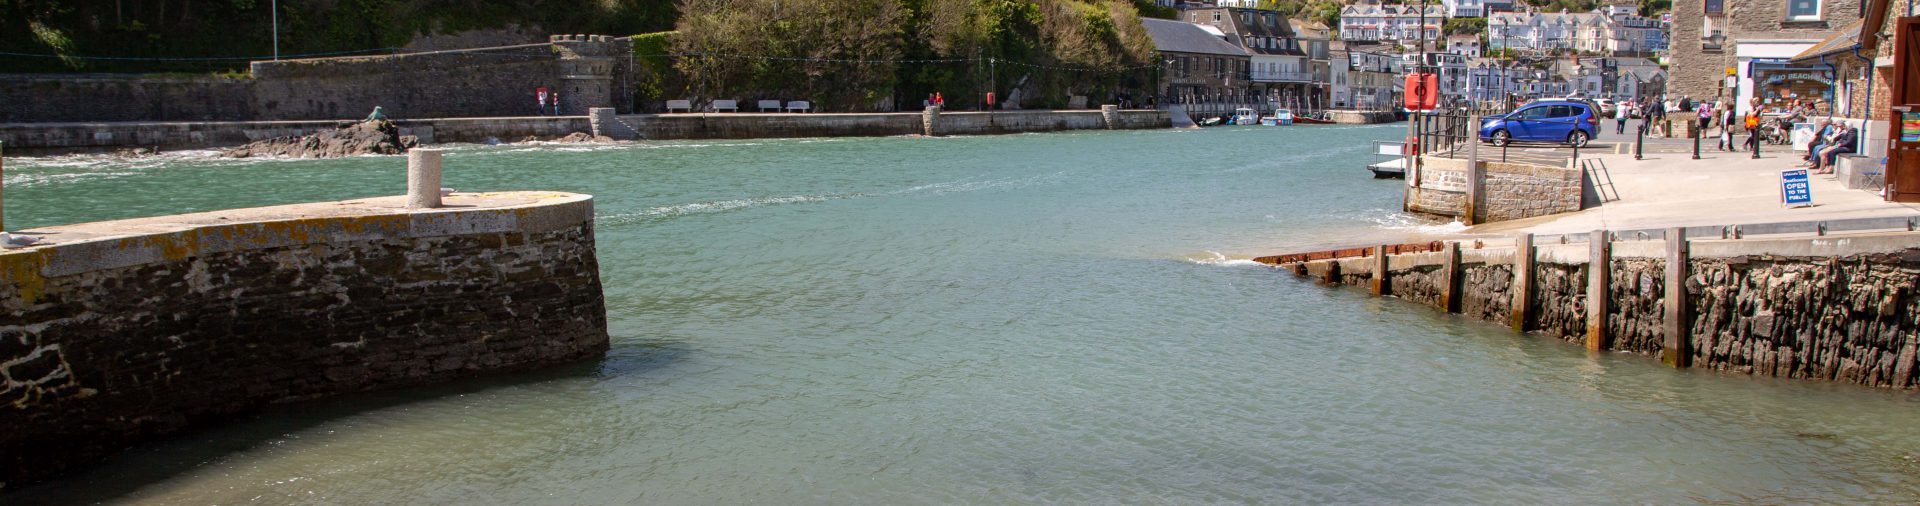 Looe Harbour: Beautiful all year round